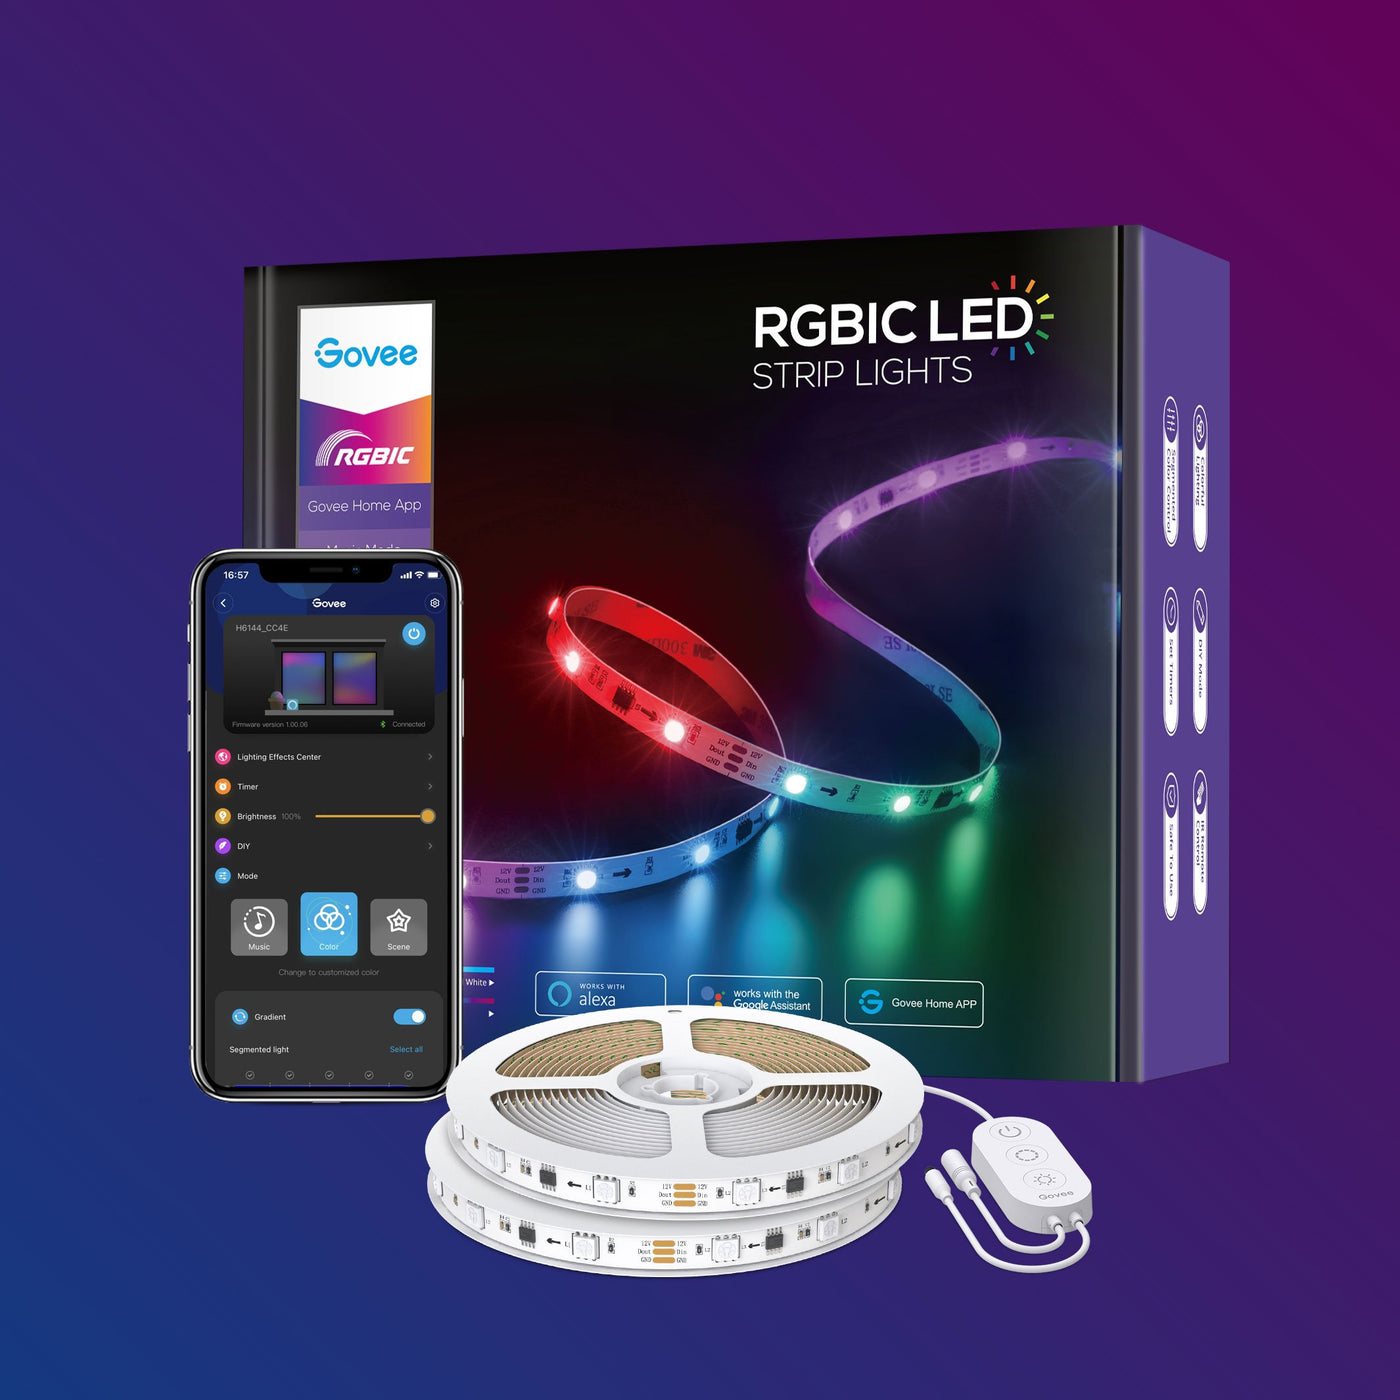 Govee RGBIC LED Strip Lights with Covers